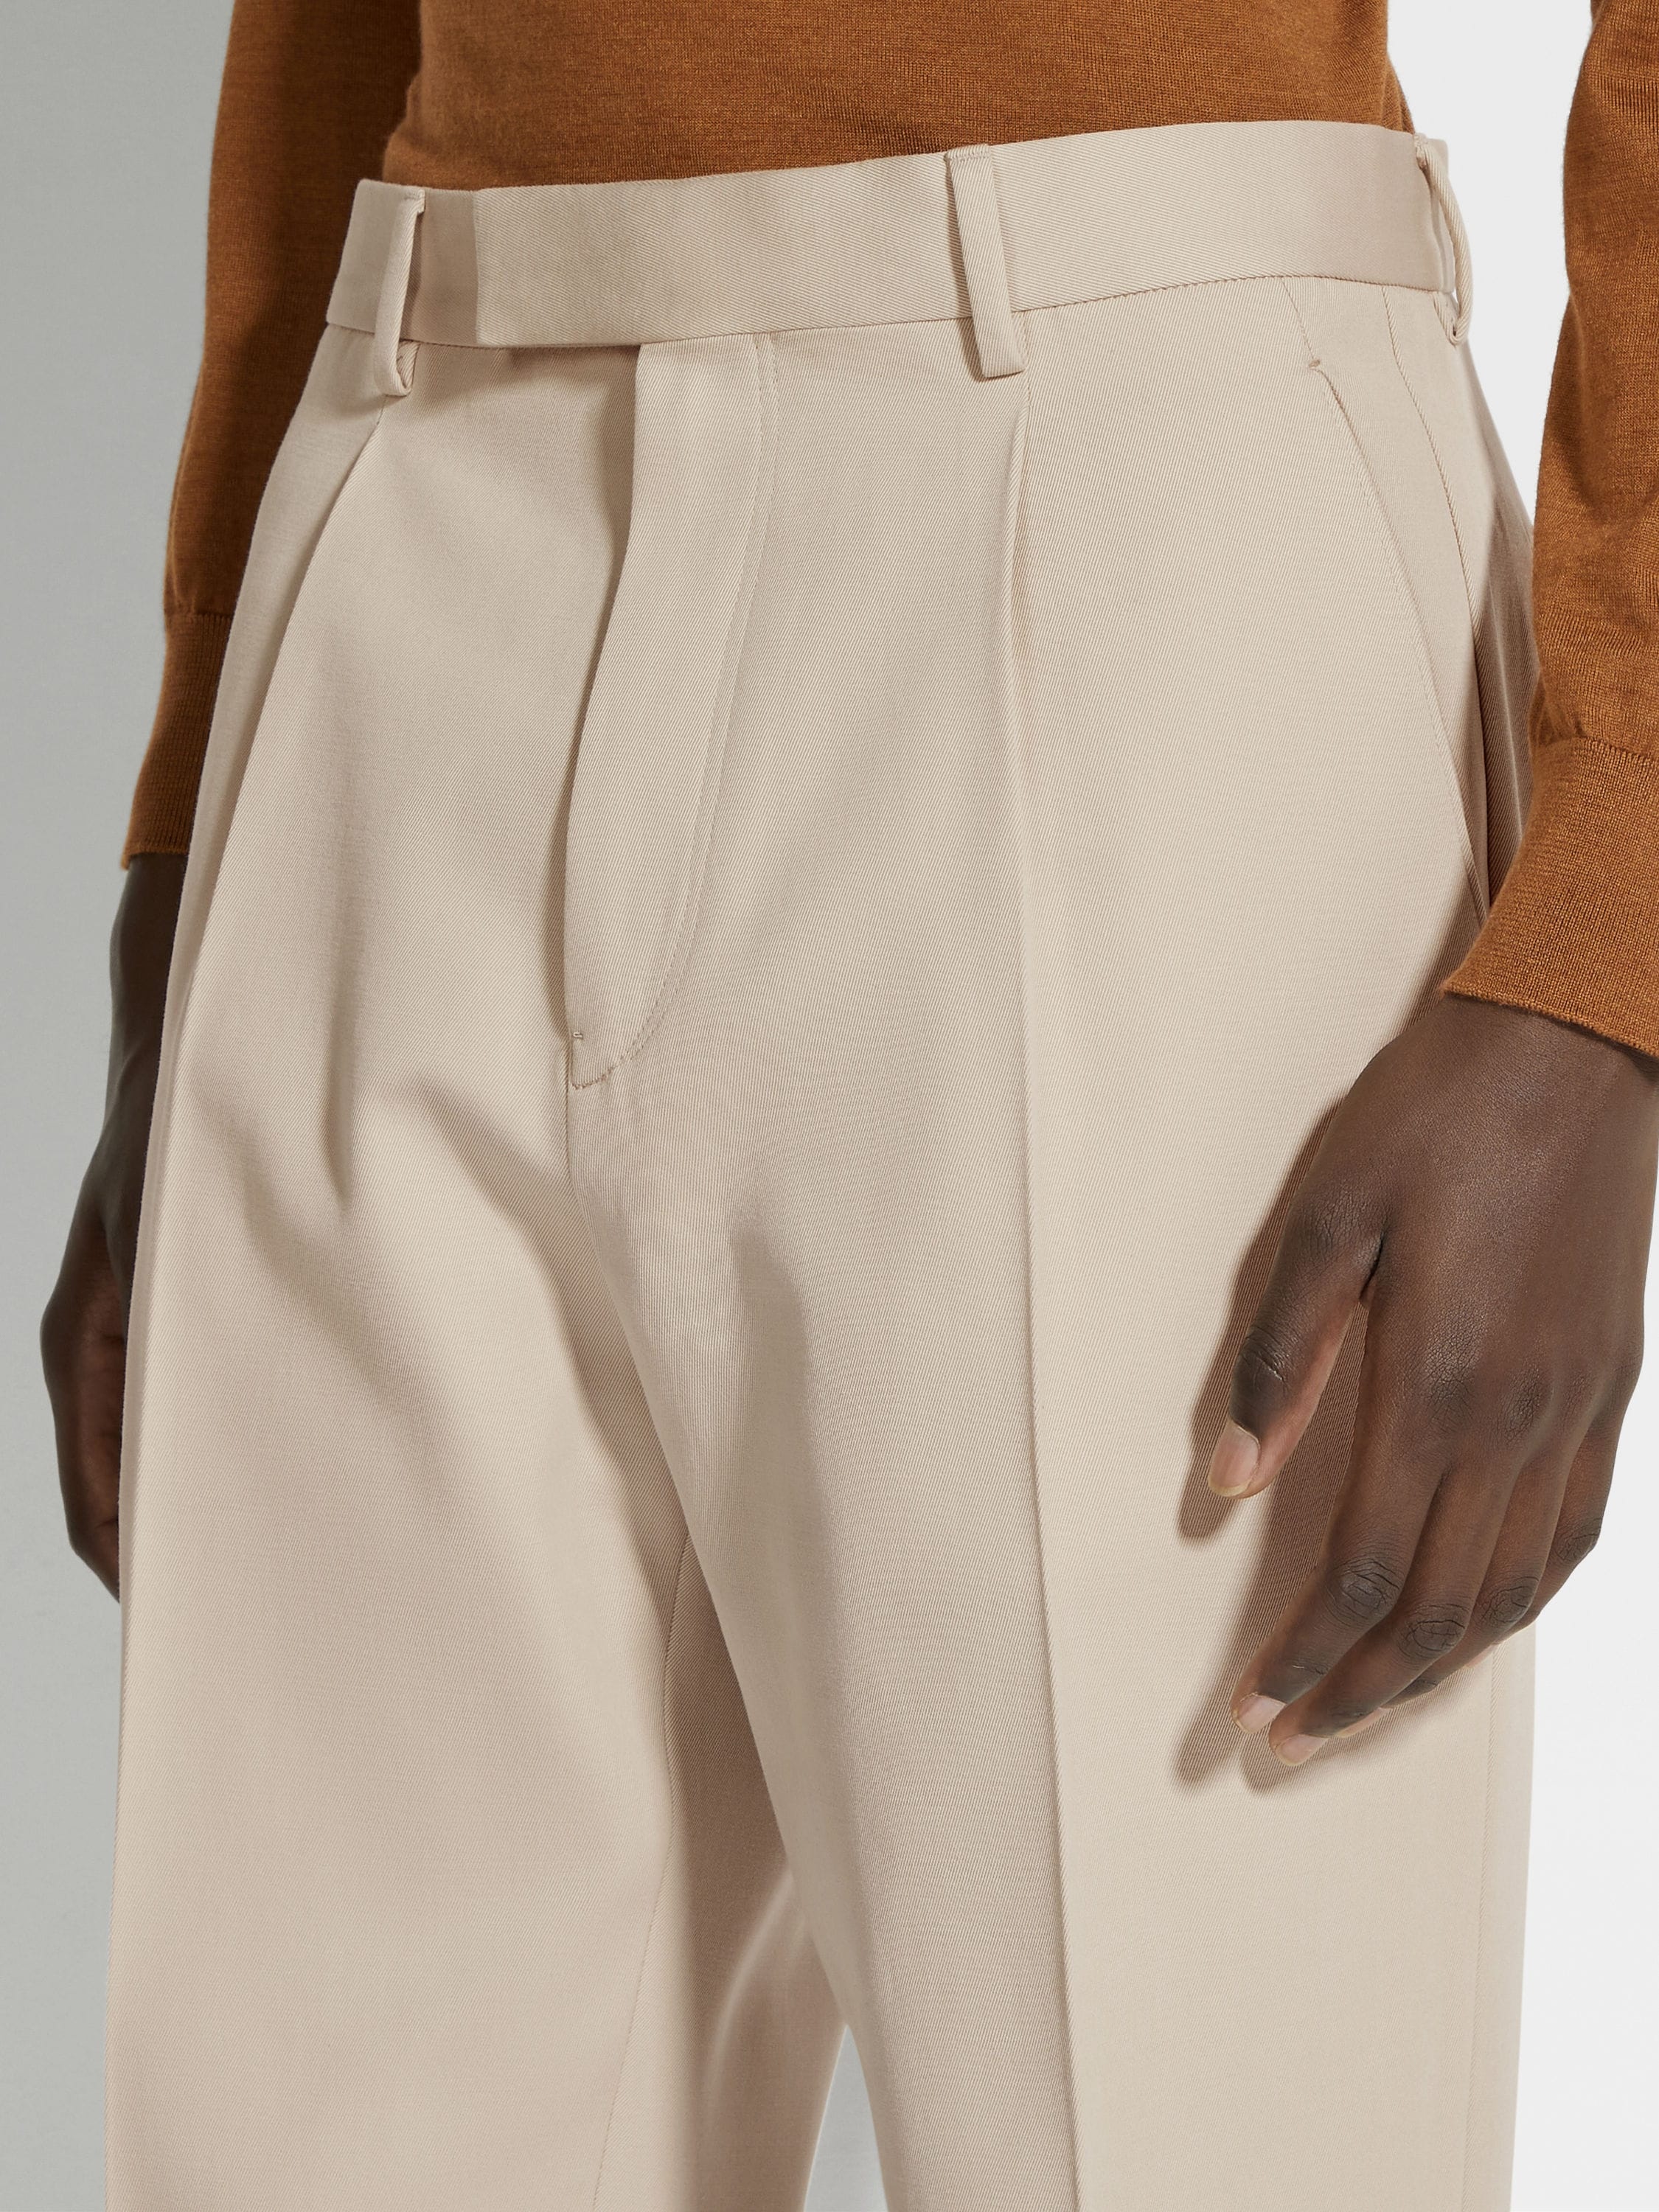 LIGHT BEIGE COTTON AND WOOL PANTS - 2